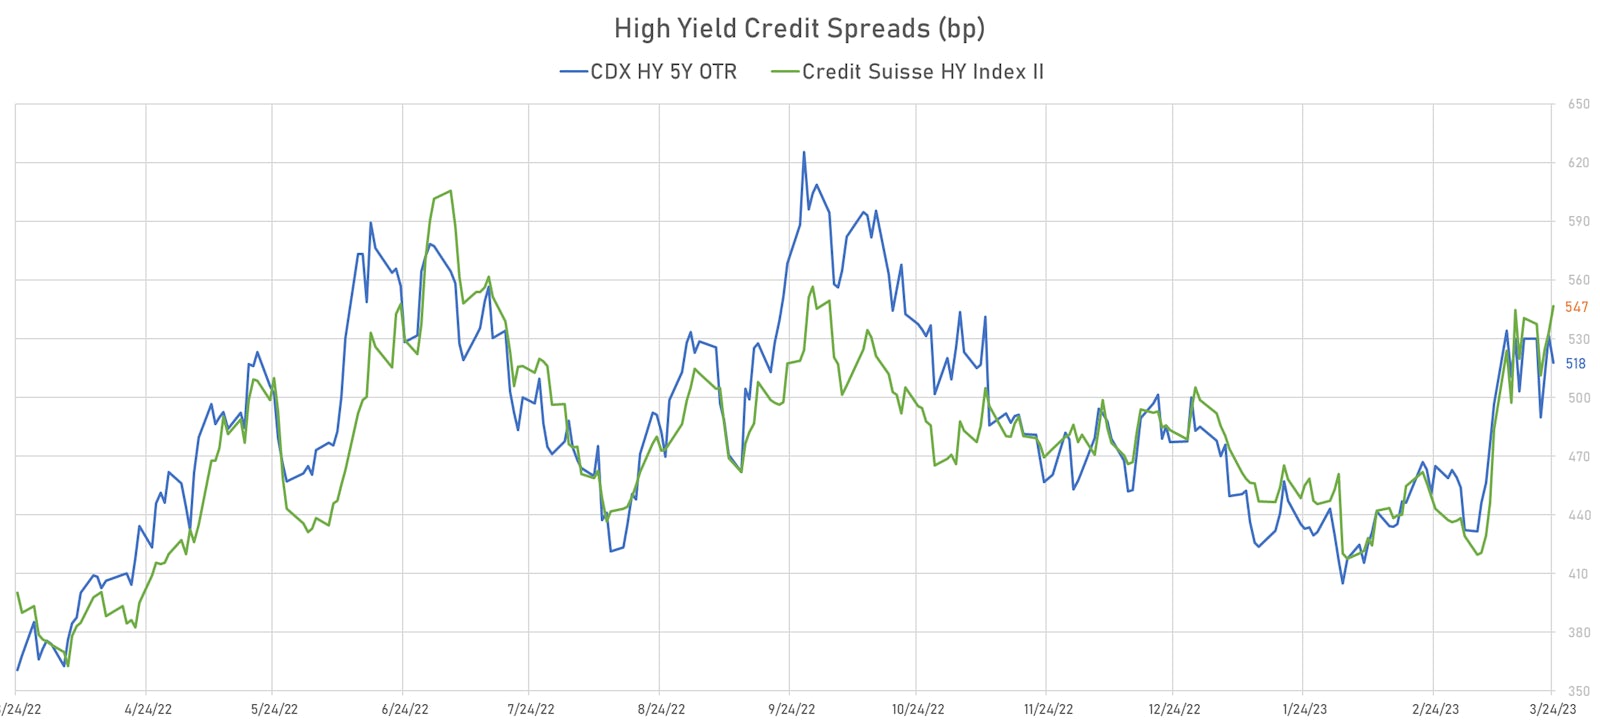 High Yield Cash 5Y CDX HY Spreads | Sources: phipost.com, Refinitiv & Credit Suisse data